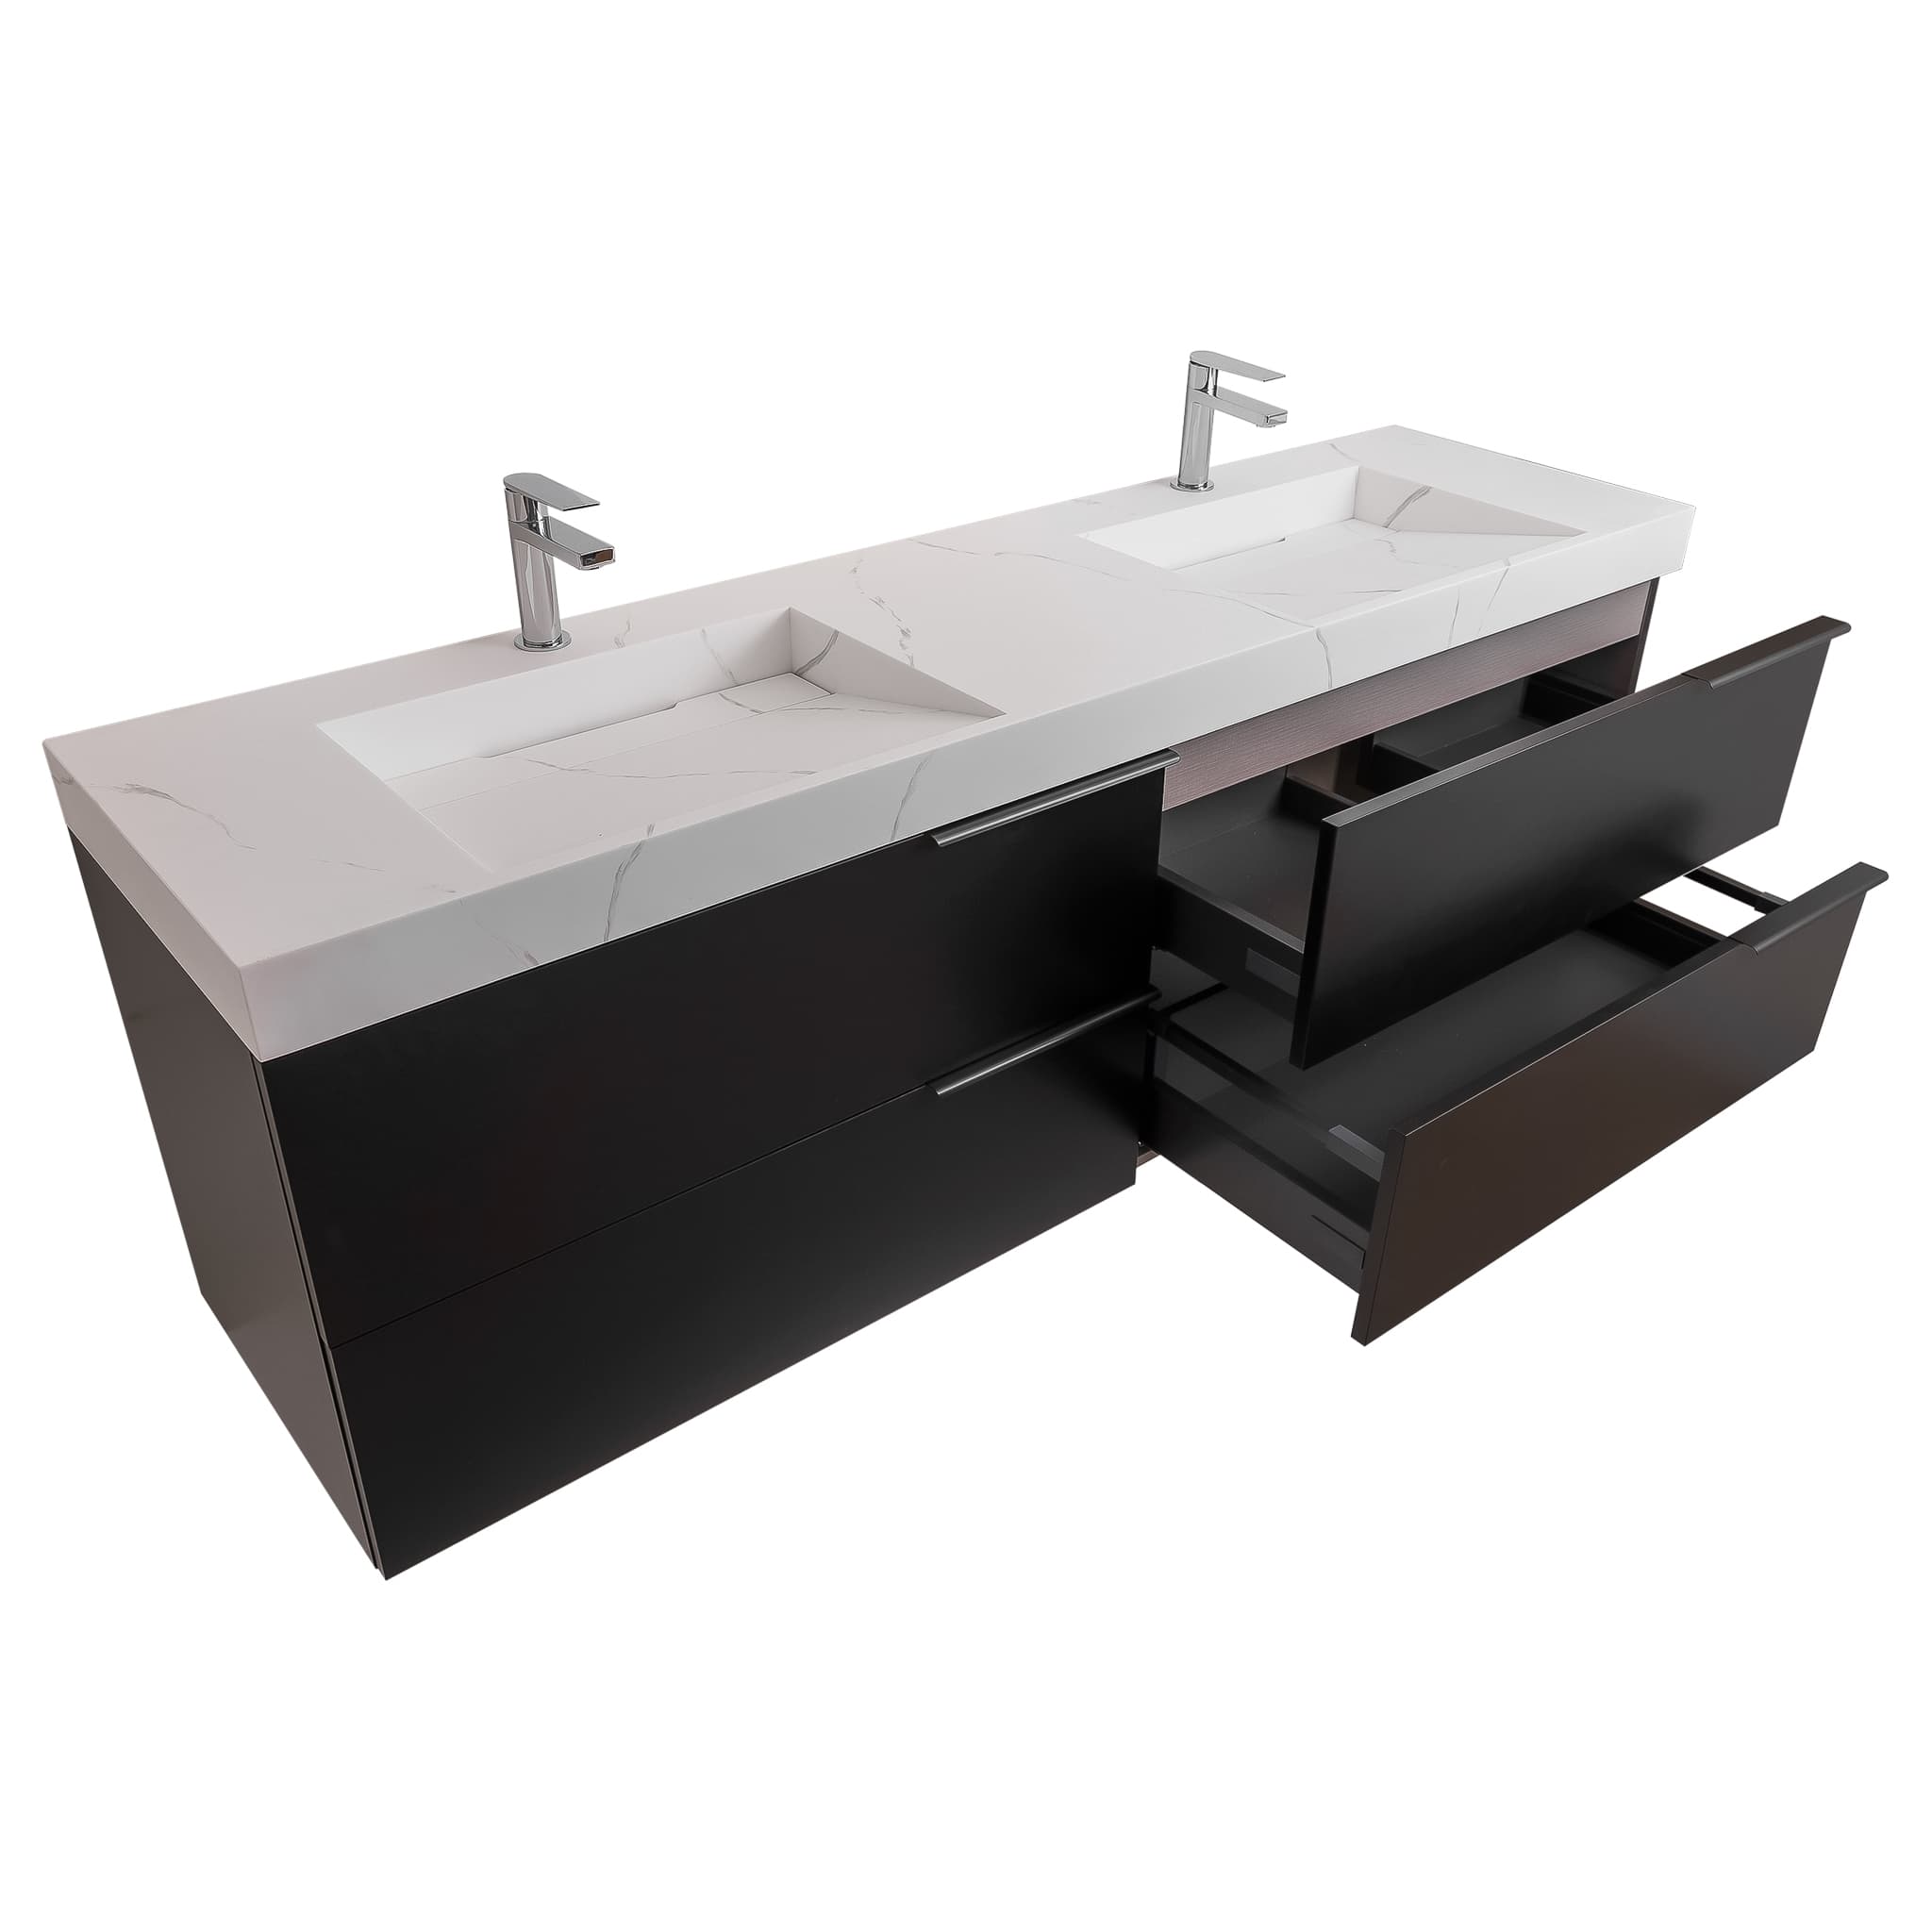 Mallorca 72 Matte Black Cabinet,  Solid Surface Matte White Top Carrara Infinity Double Sink, Wall Mounted Modern Vanity Set